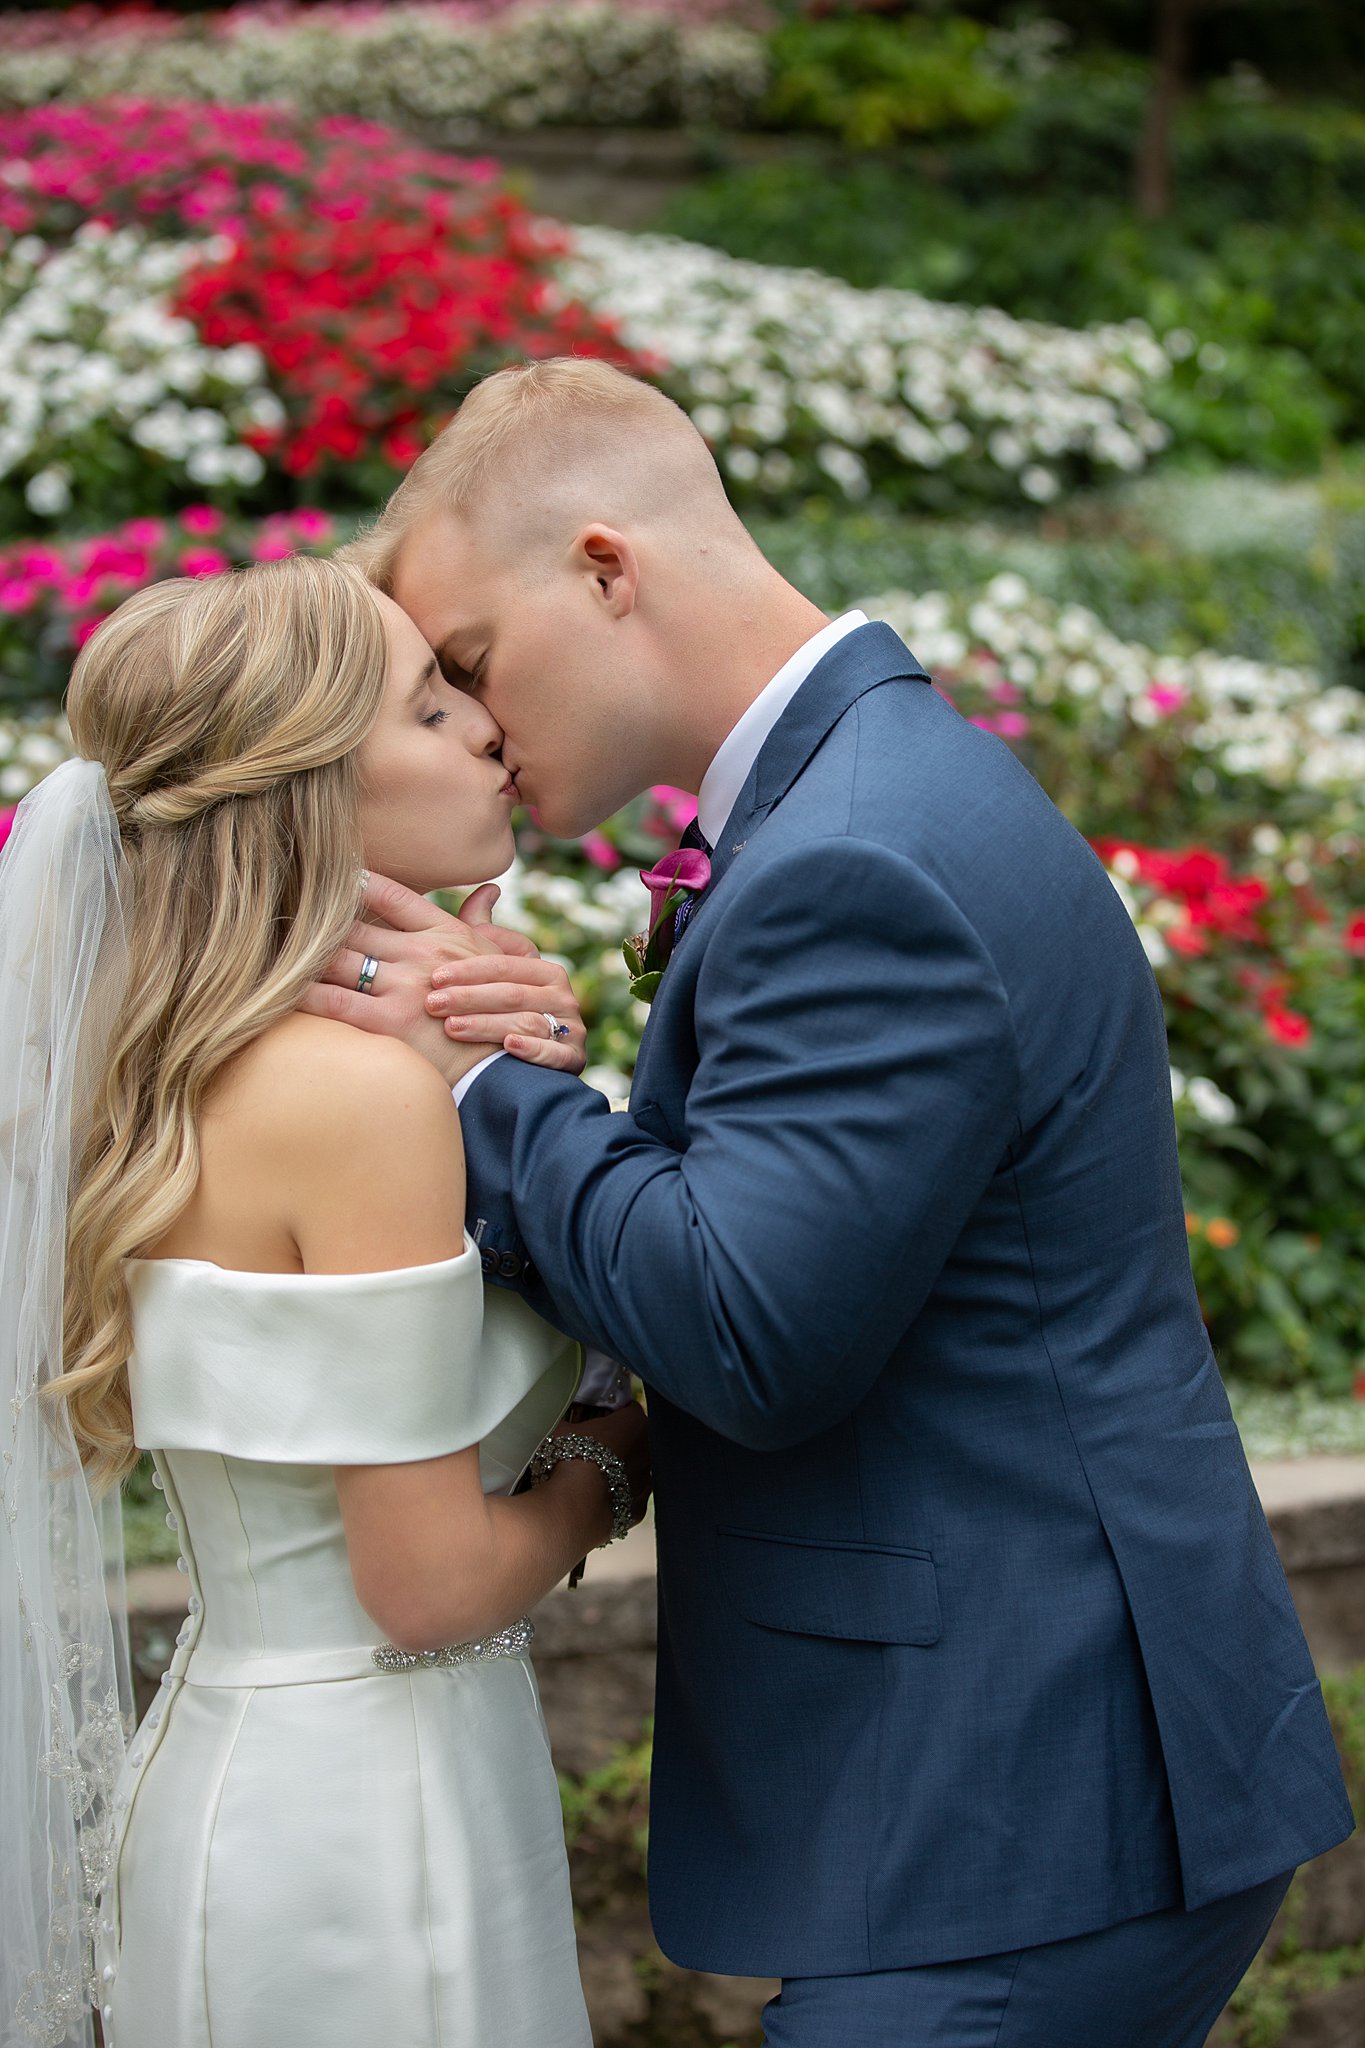 Newlyweds kiss in blooming flower garden with a stone wall